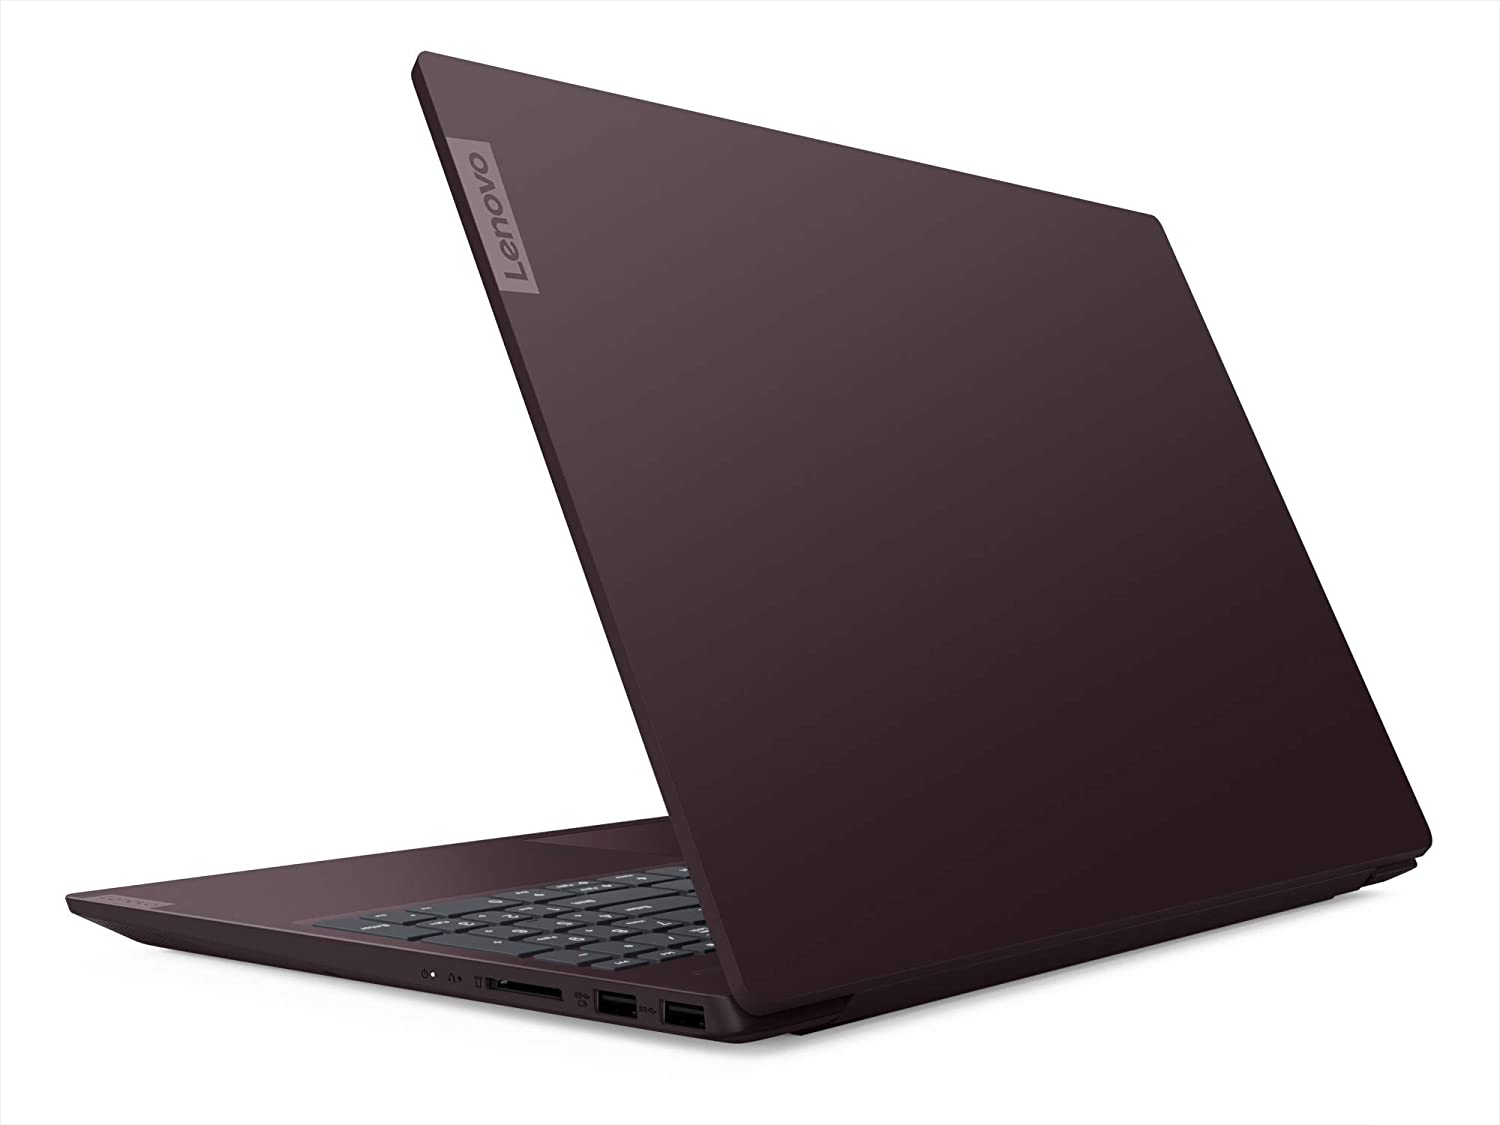 <strong>Lenovo ideaPad S340 15.6 Inch Premium Laptop</strong>